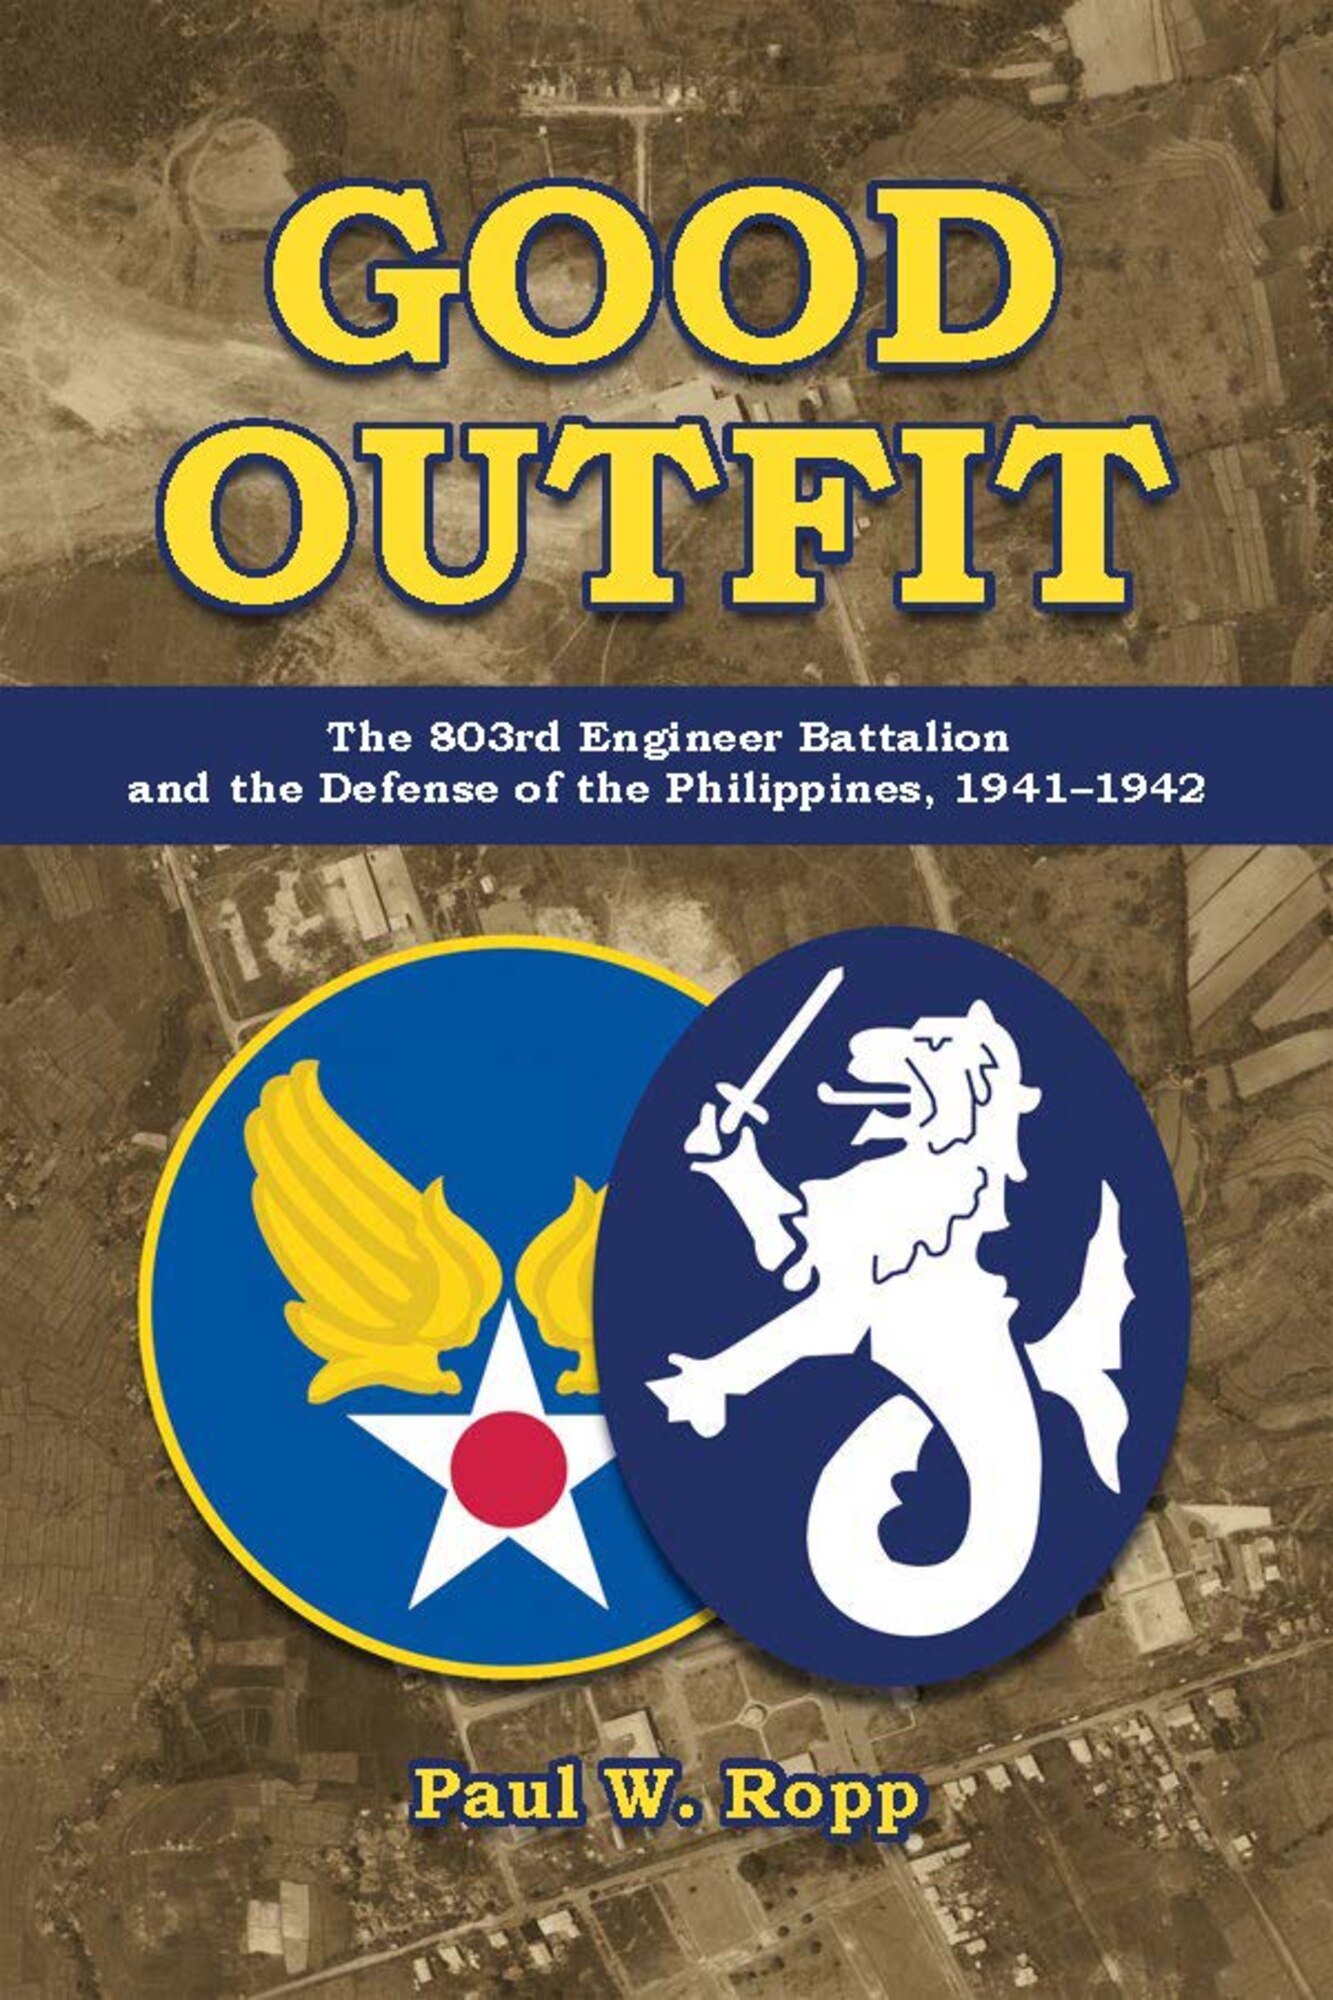 In Good Outfit: The 803rd Engineer Battalion and the Defense of the Philippines, 1941–1942, author Paul W. Ropp, highlights the few successes and many difficulties in establishing and maintaining expeditionary airfields in a contested environment with limited resources. (Image by Air University Press)